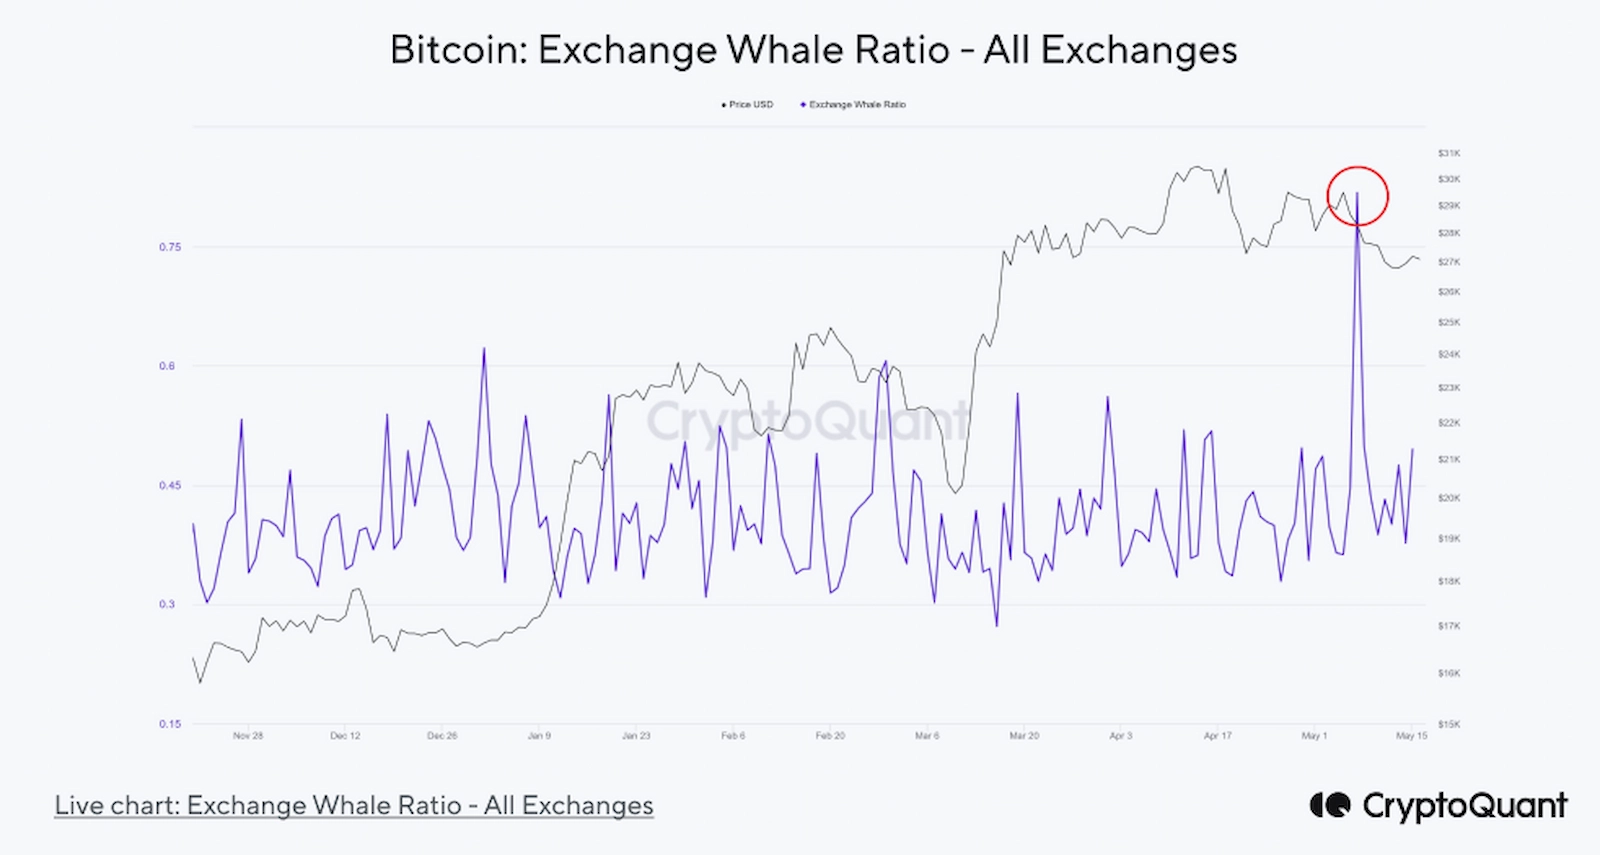 Exchange whale ratio for Bitcoin spiked in early May